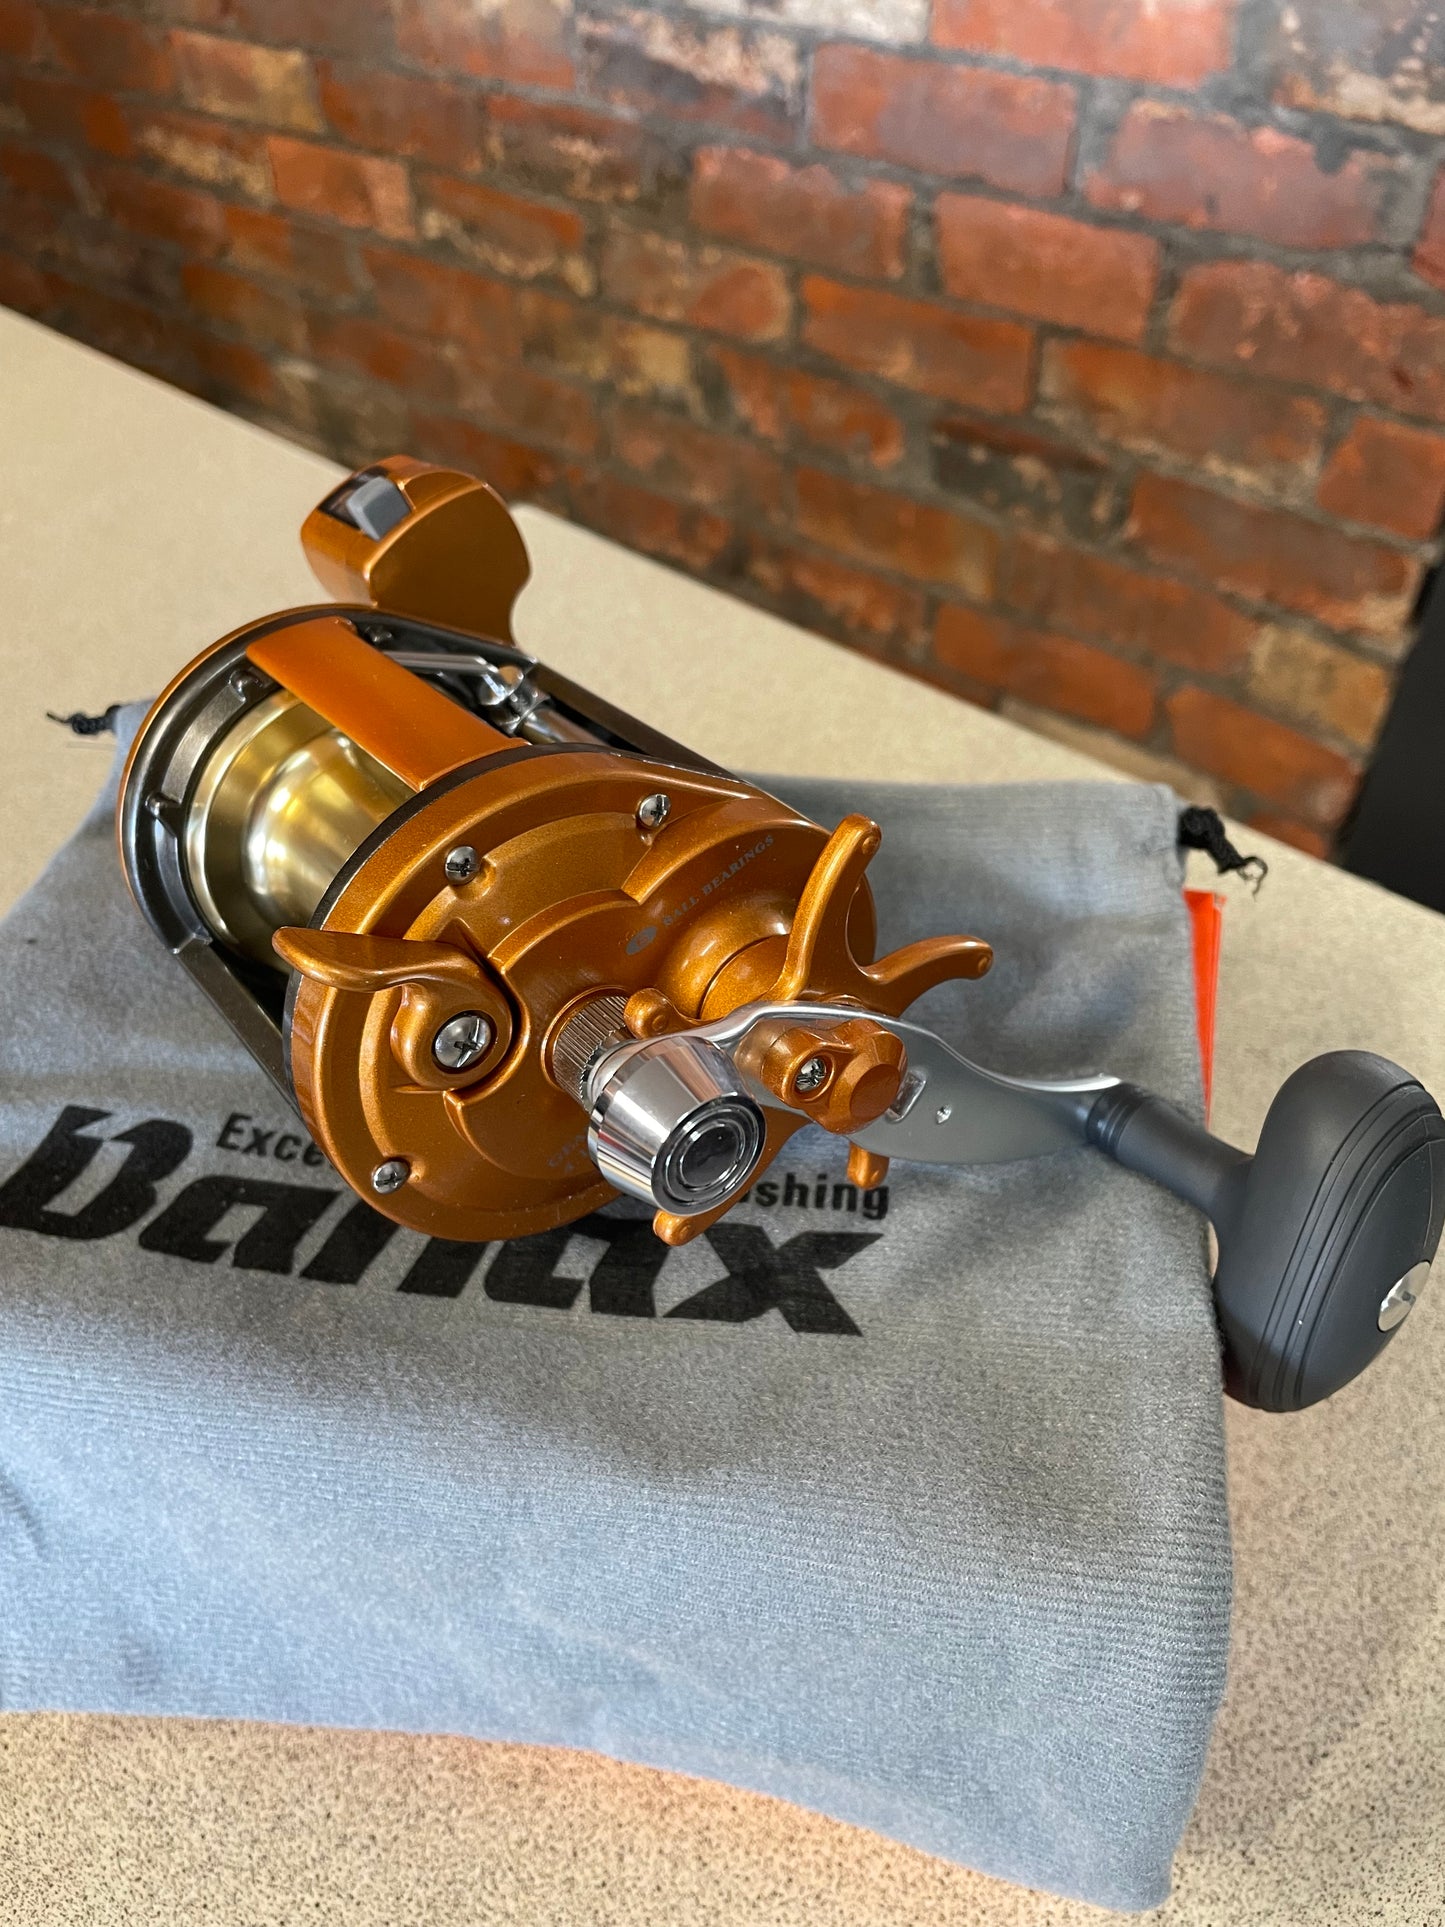 Banax SI Spinning Reel - Large Size for Saltwater & UK